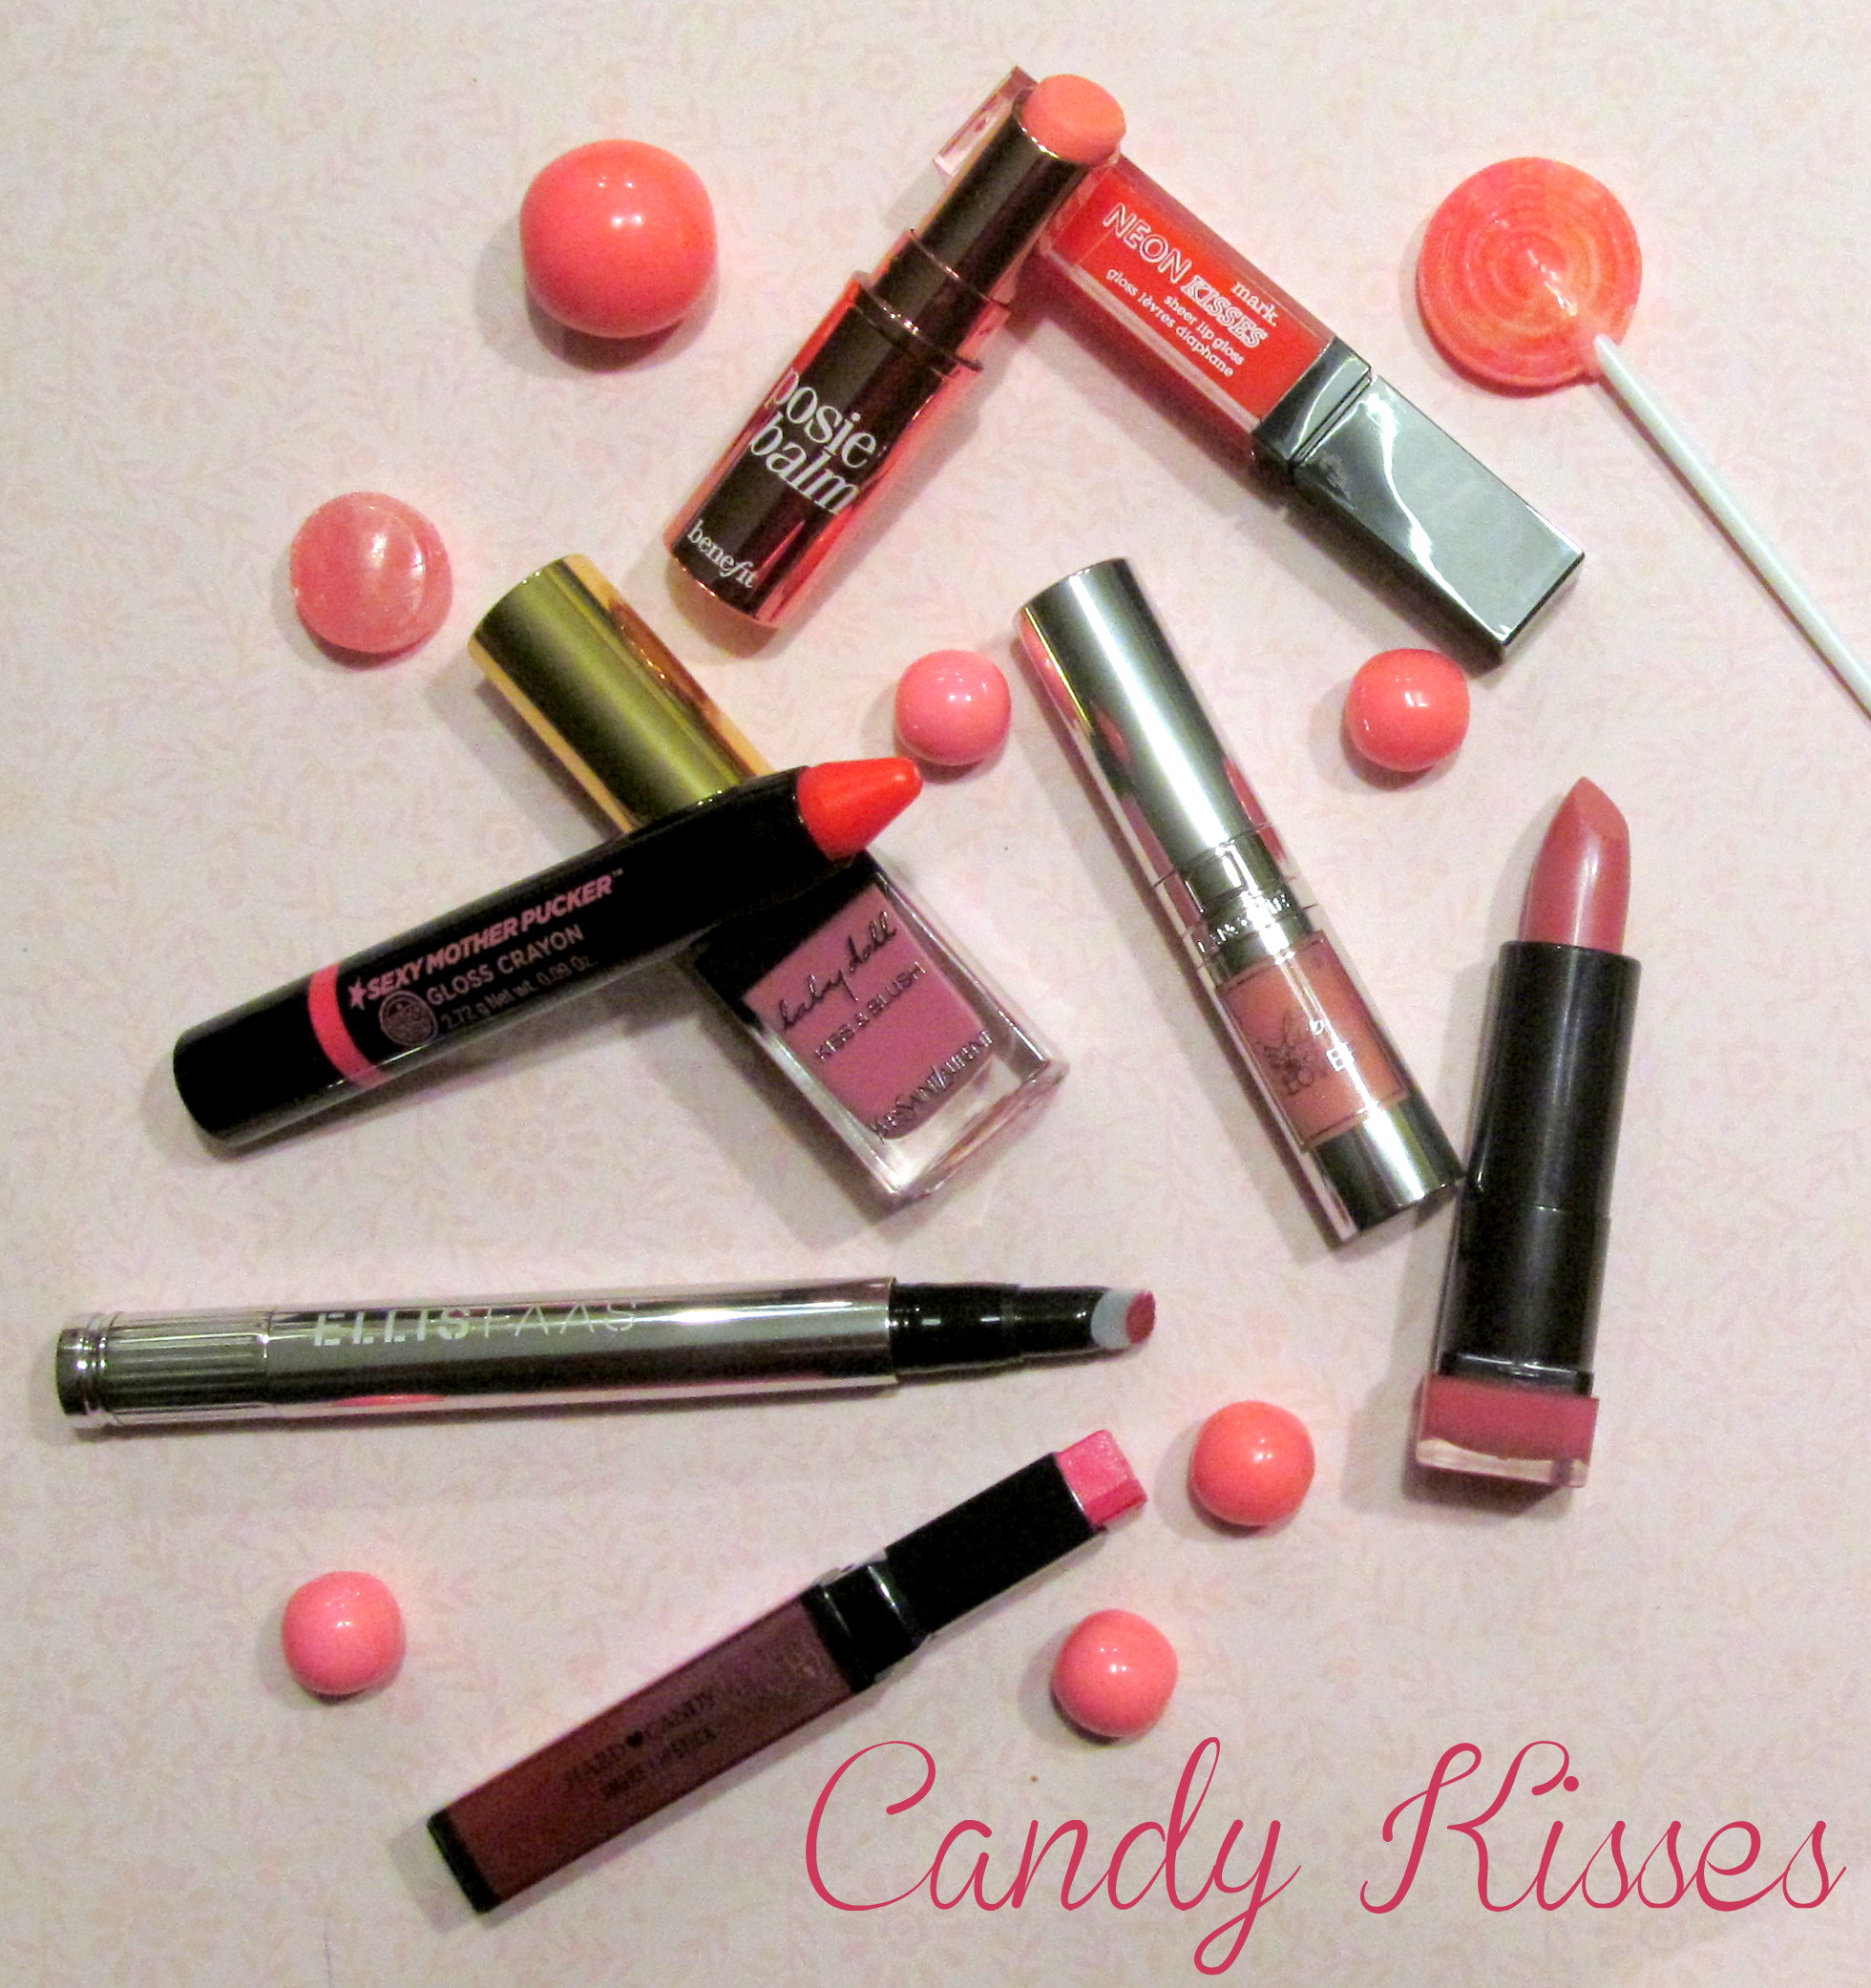 Candy kisses, spring 2014 lipstick, lip gloss, beauty blogger, favorite lipstick, favourite lip gloss, lancome lip lover, mark neons, ellis faas ,covergirl lip perfection, benefit posie balm, ysl kiss and blush